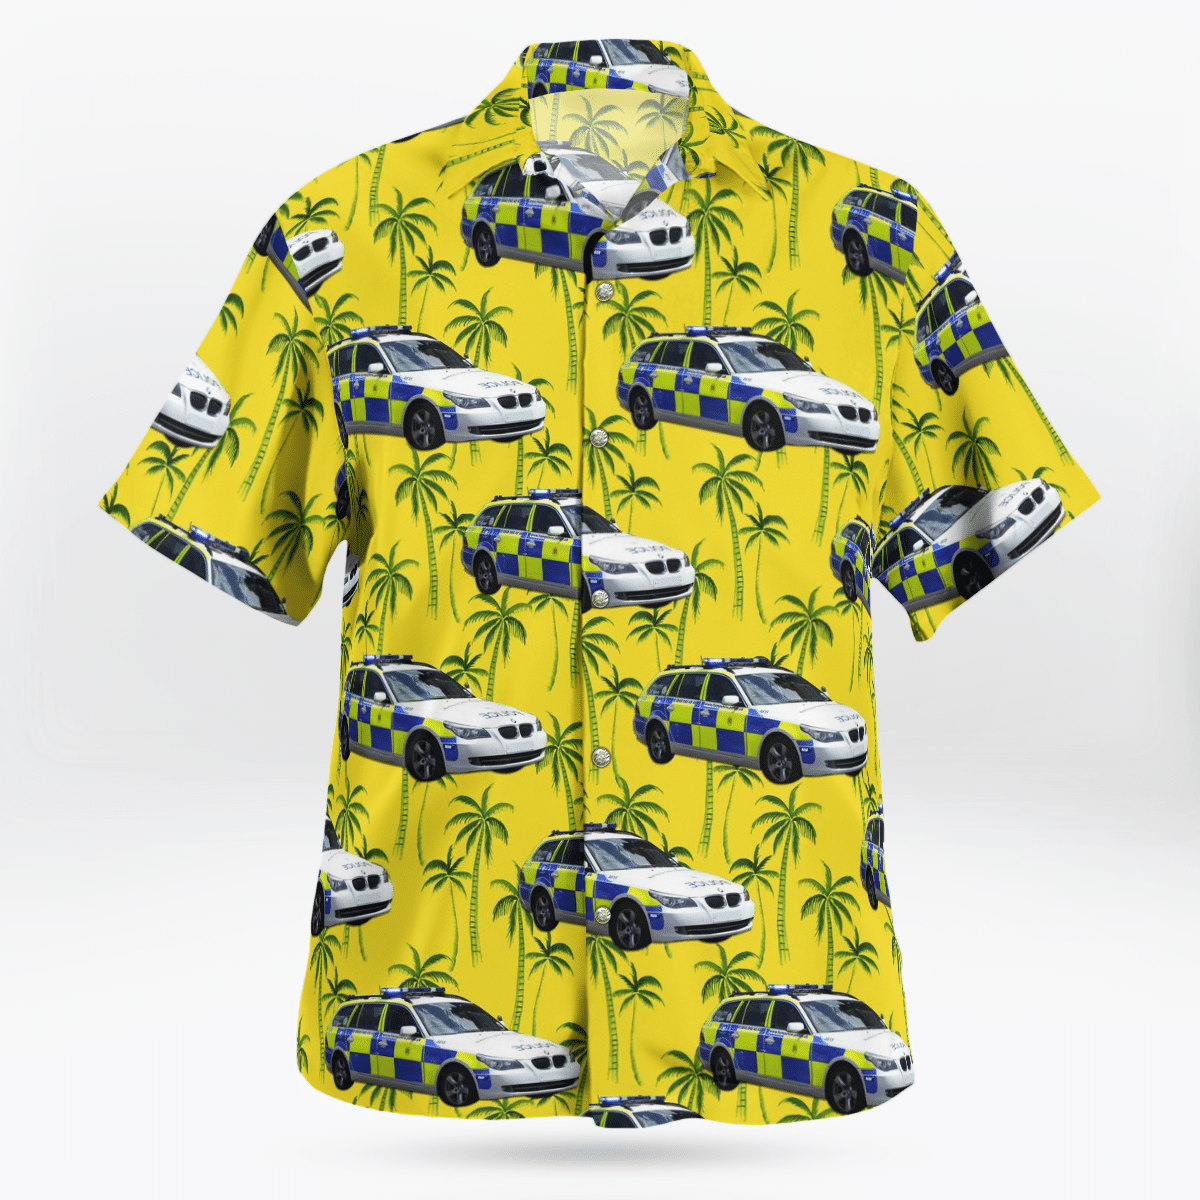 Hawaiian shirts never go out of style 209